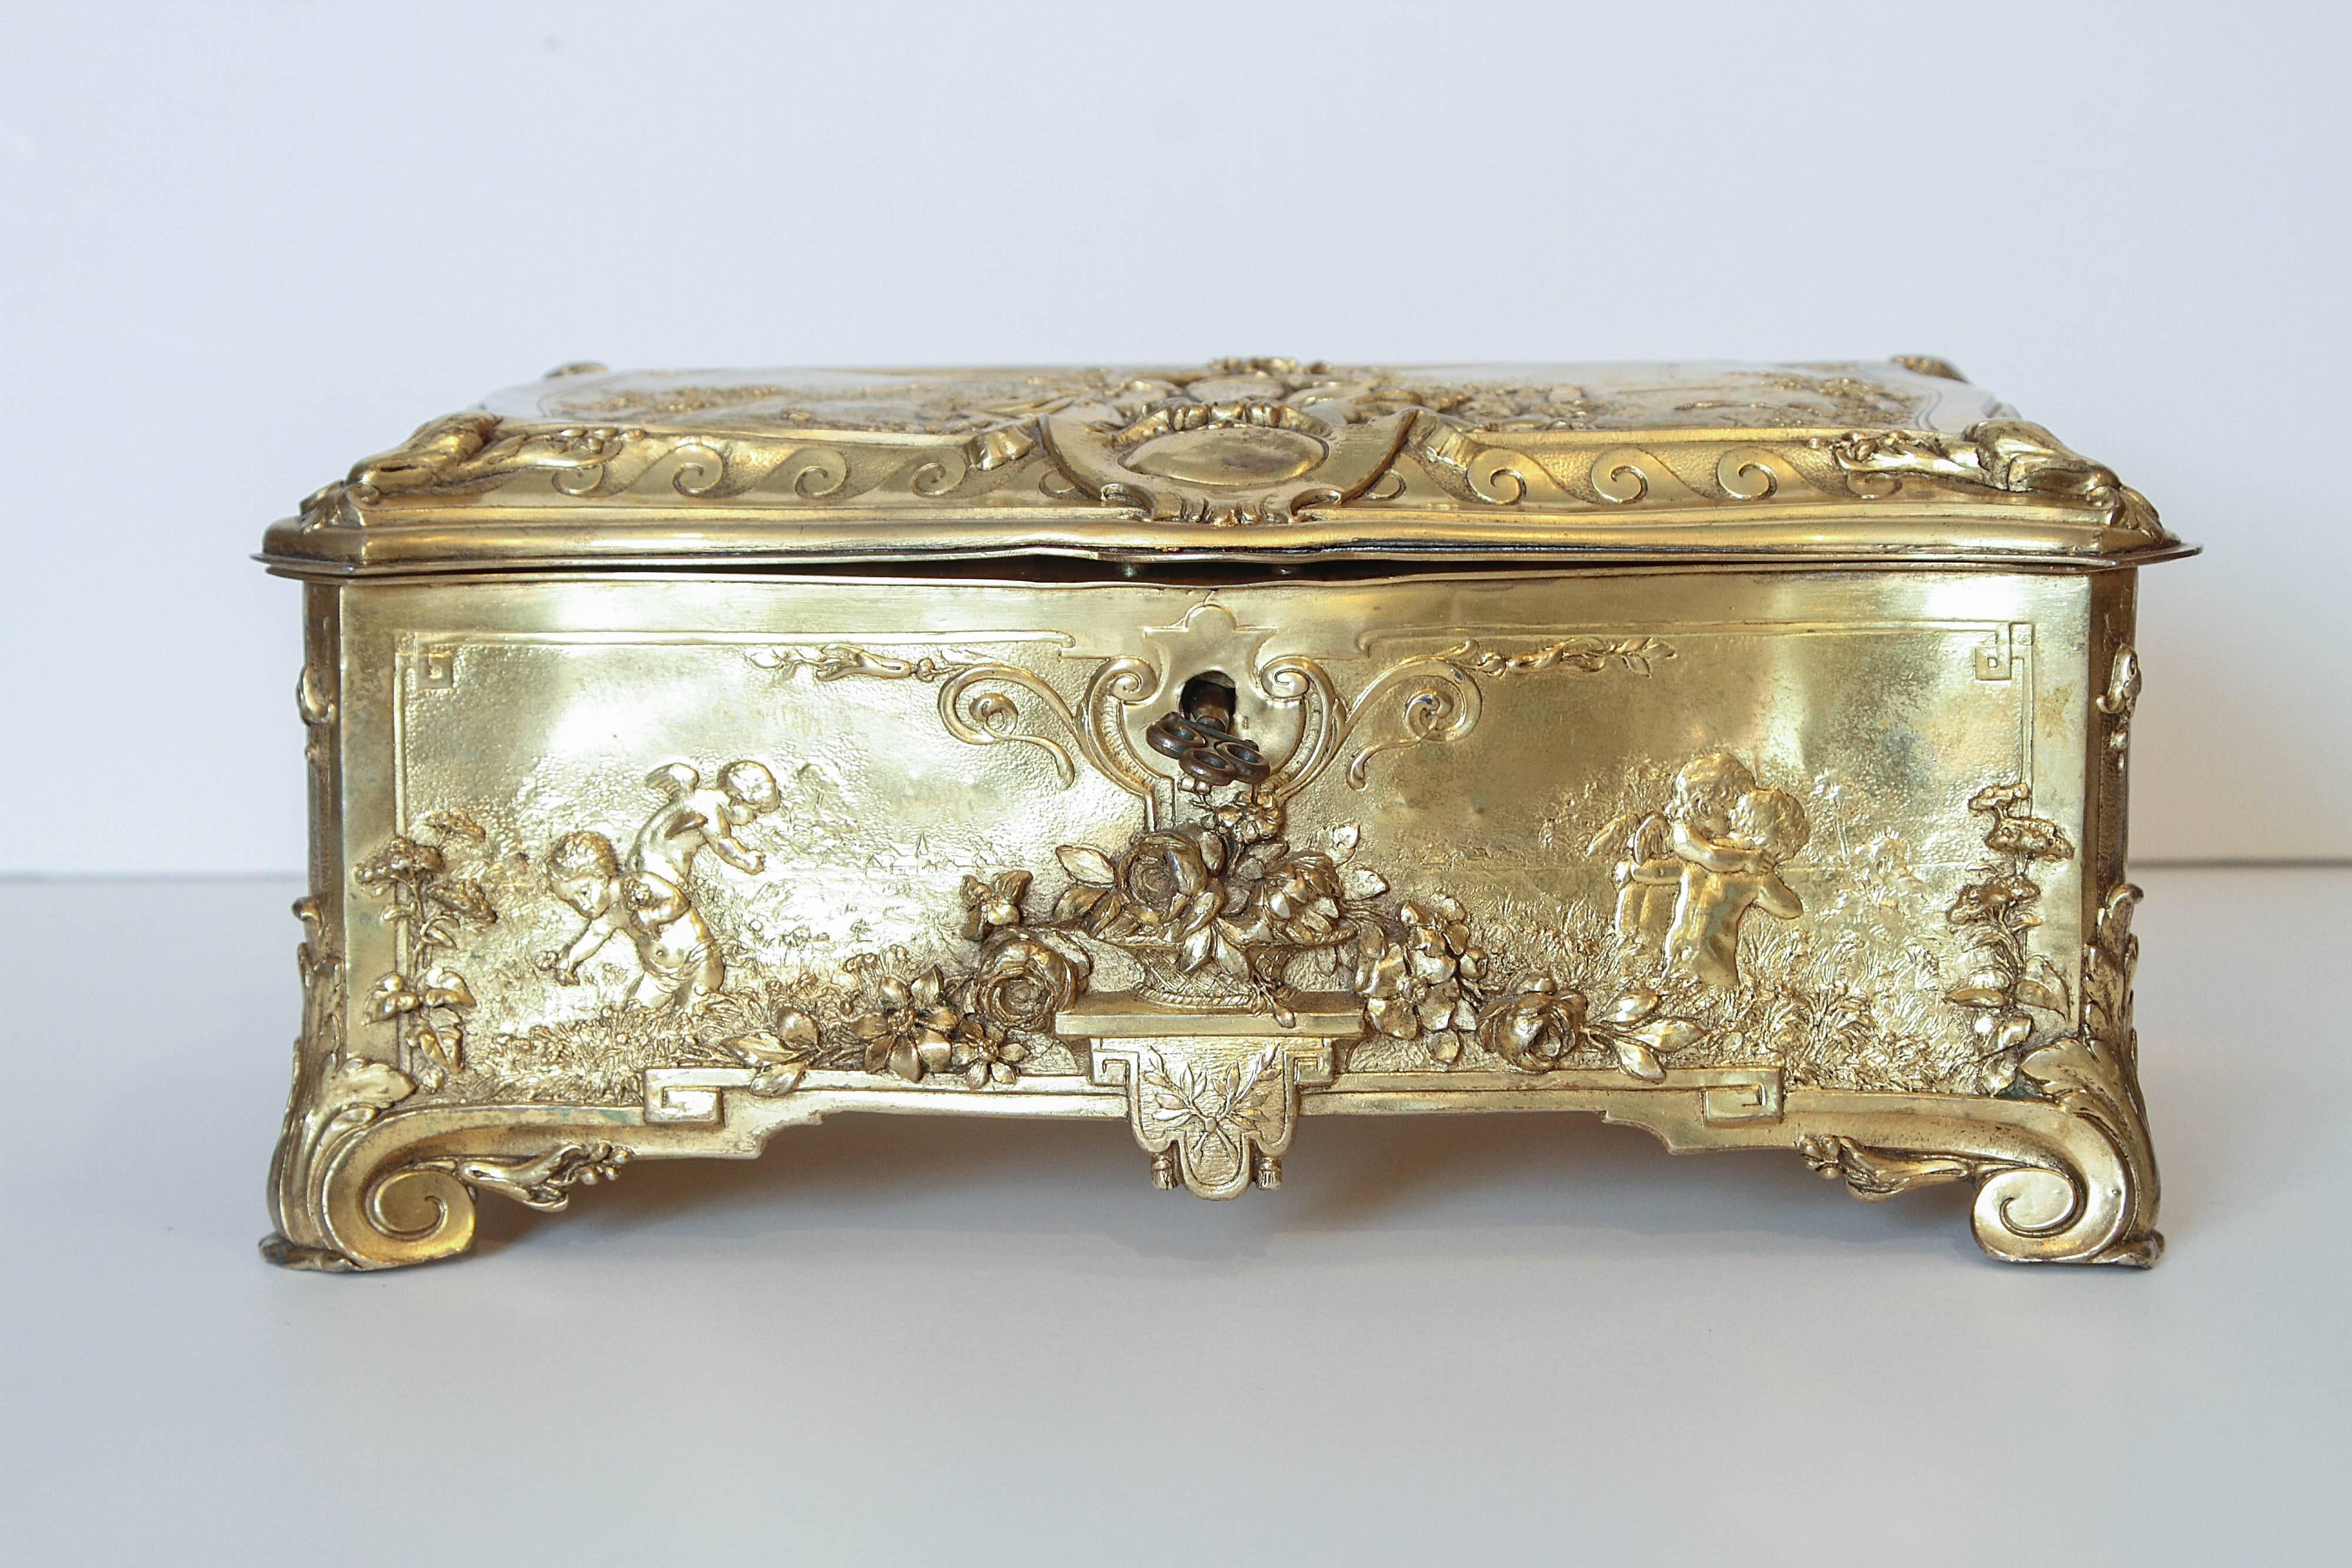 Finest quality French 19th century bronze doré box. Beautiful scenes of cherubs at play on all sides. Boucher scenes. Lined with a beautiful silk original key.